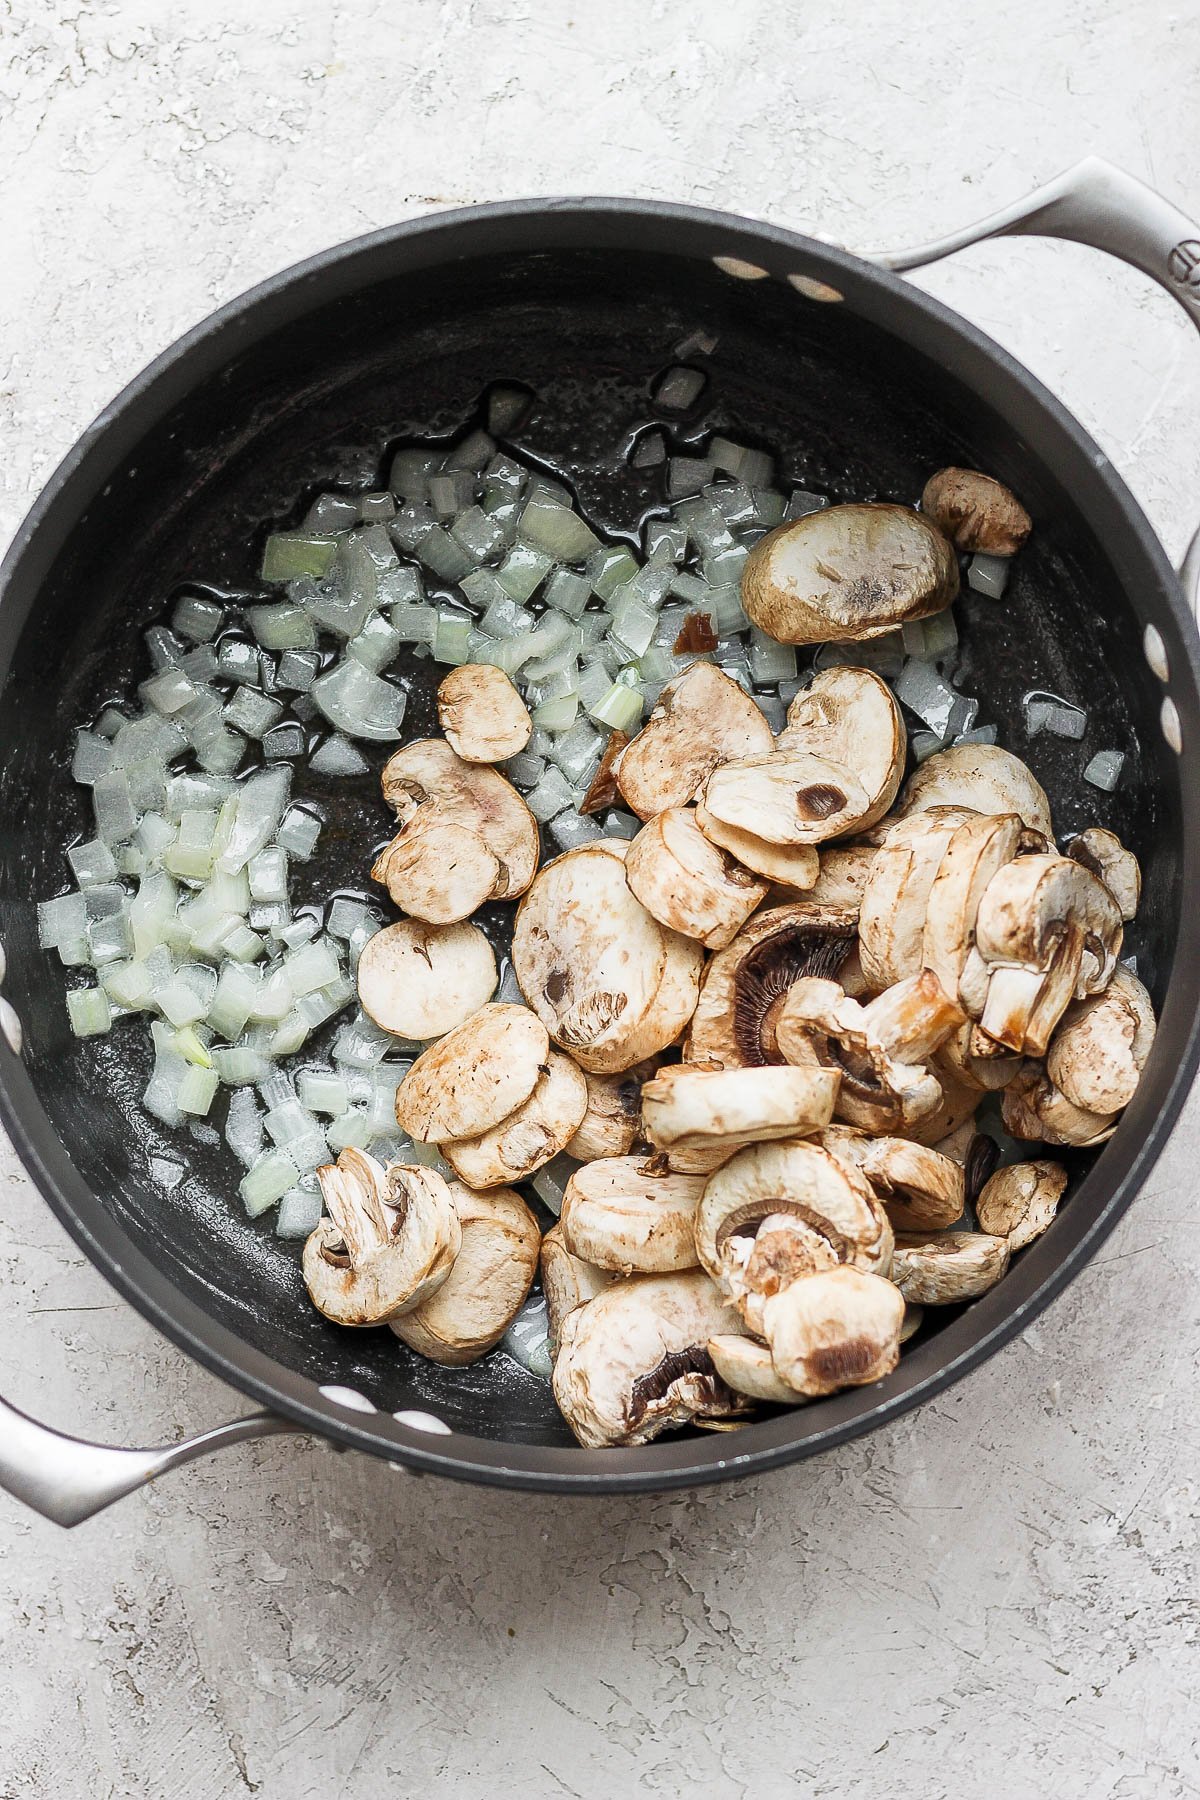 A pot with onion and mushrooms sautéing.